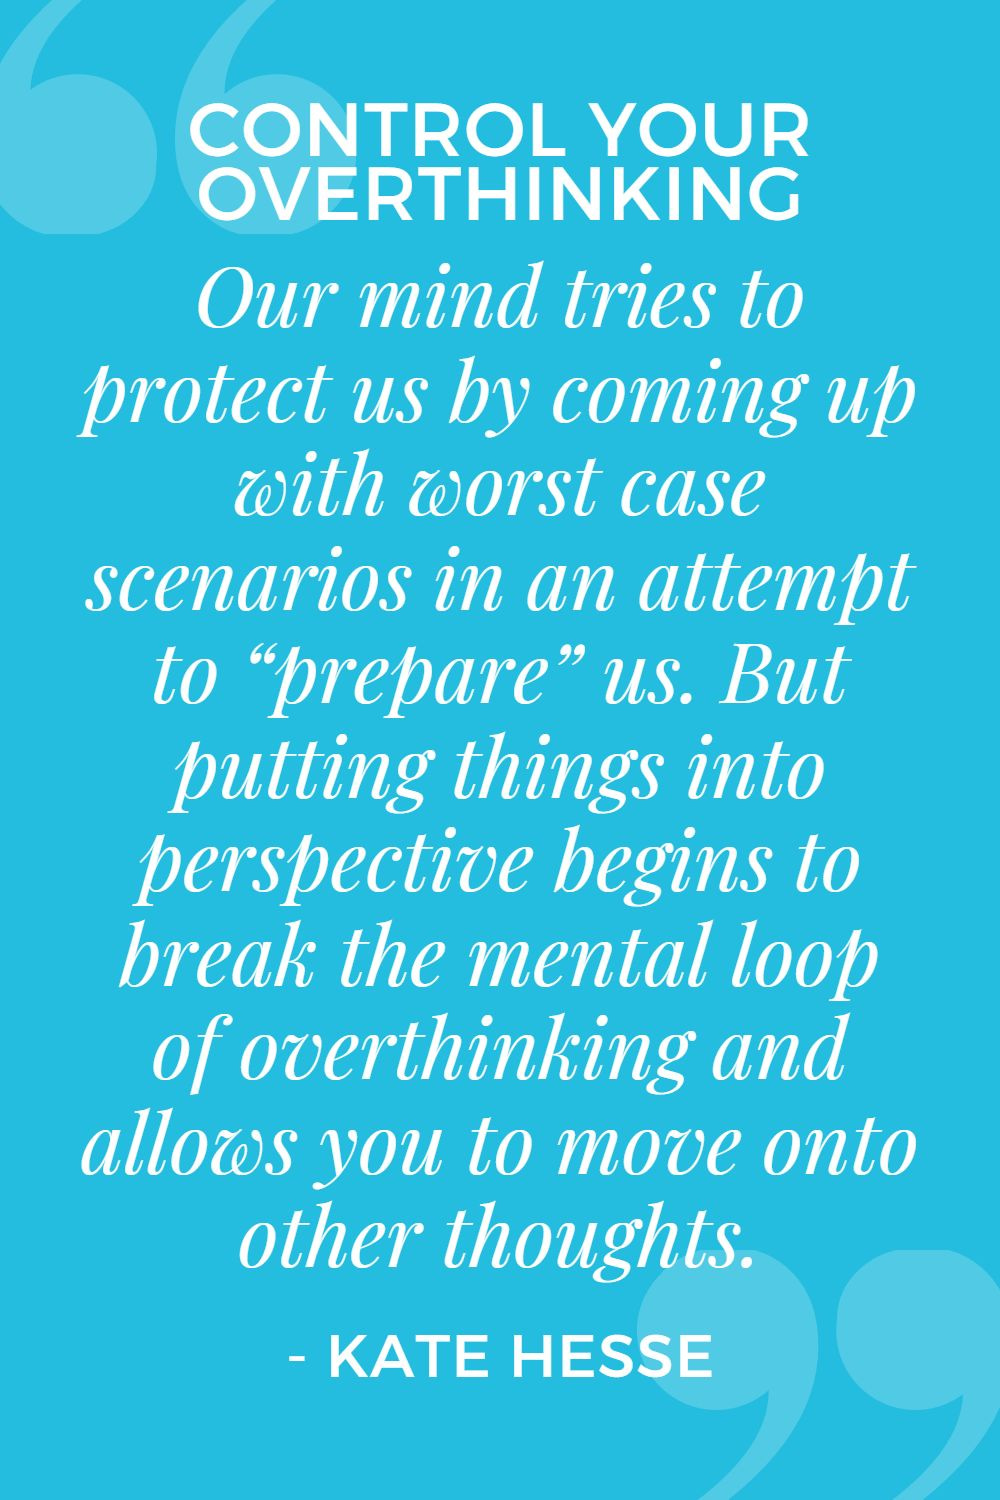 Our mind tries to protect us by coming up with worse case scenarios in an attempt to "prepare" us. But putting things into perspective begins to break the mental loop of overthinking and allows you to move onto other thoughts.